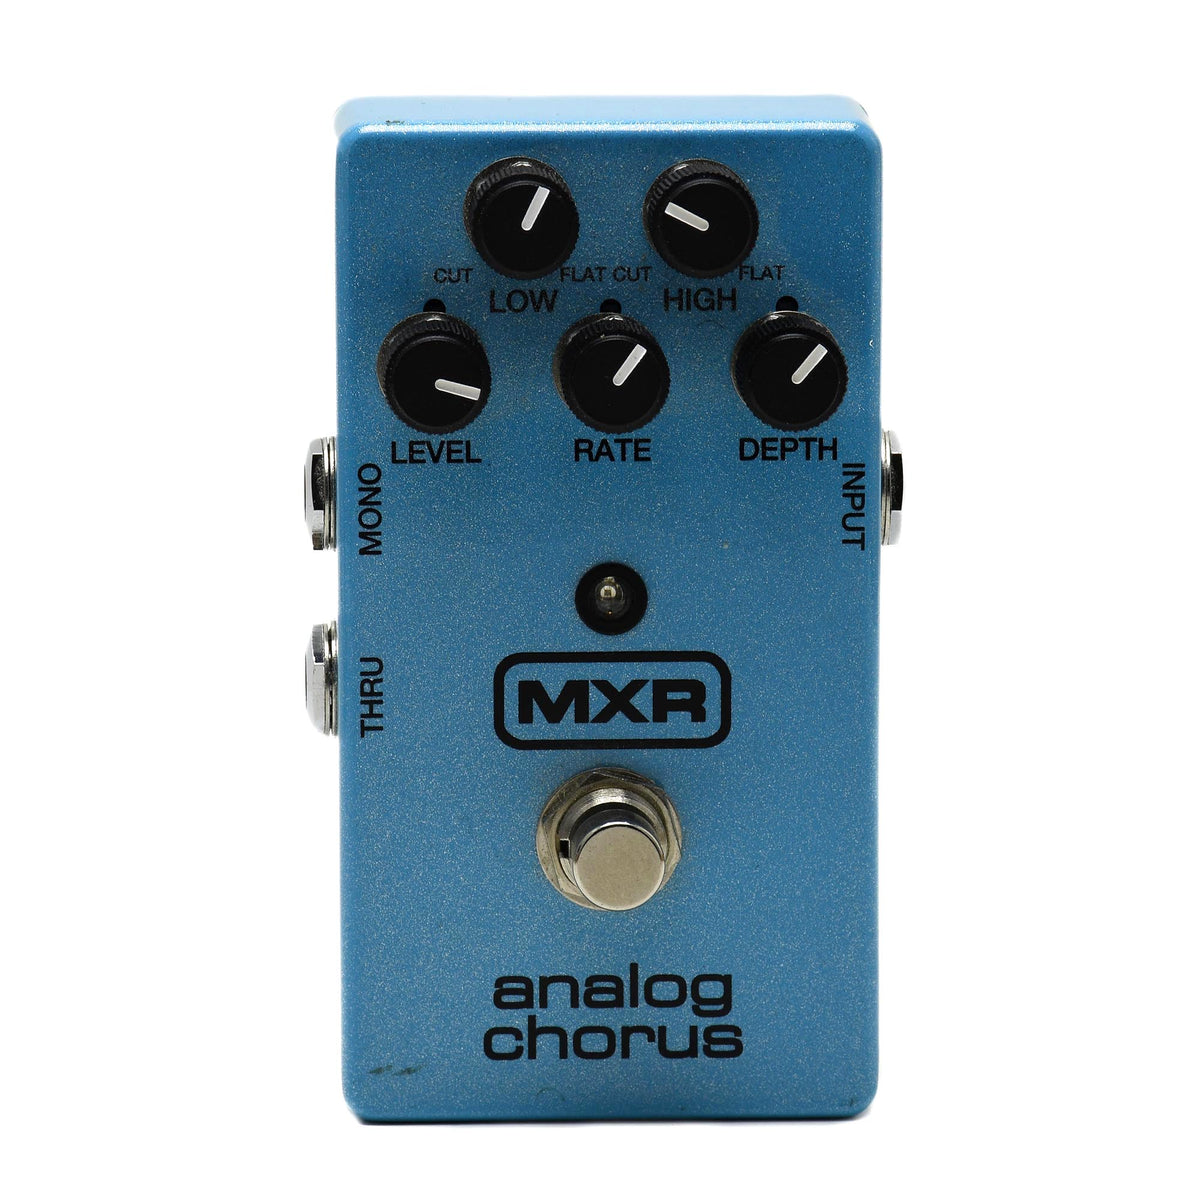 The newest MXR M234 Analog Chorus - Used MXR is available for sale